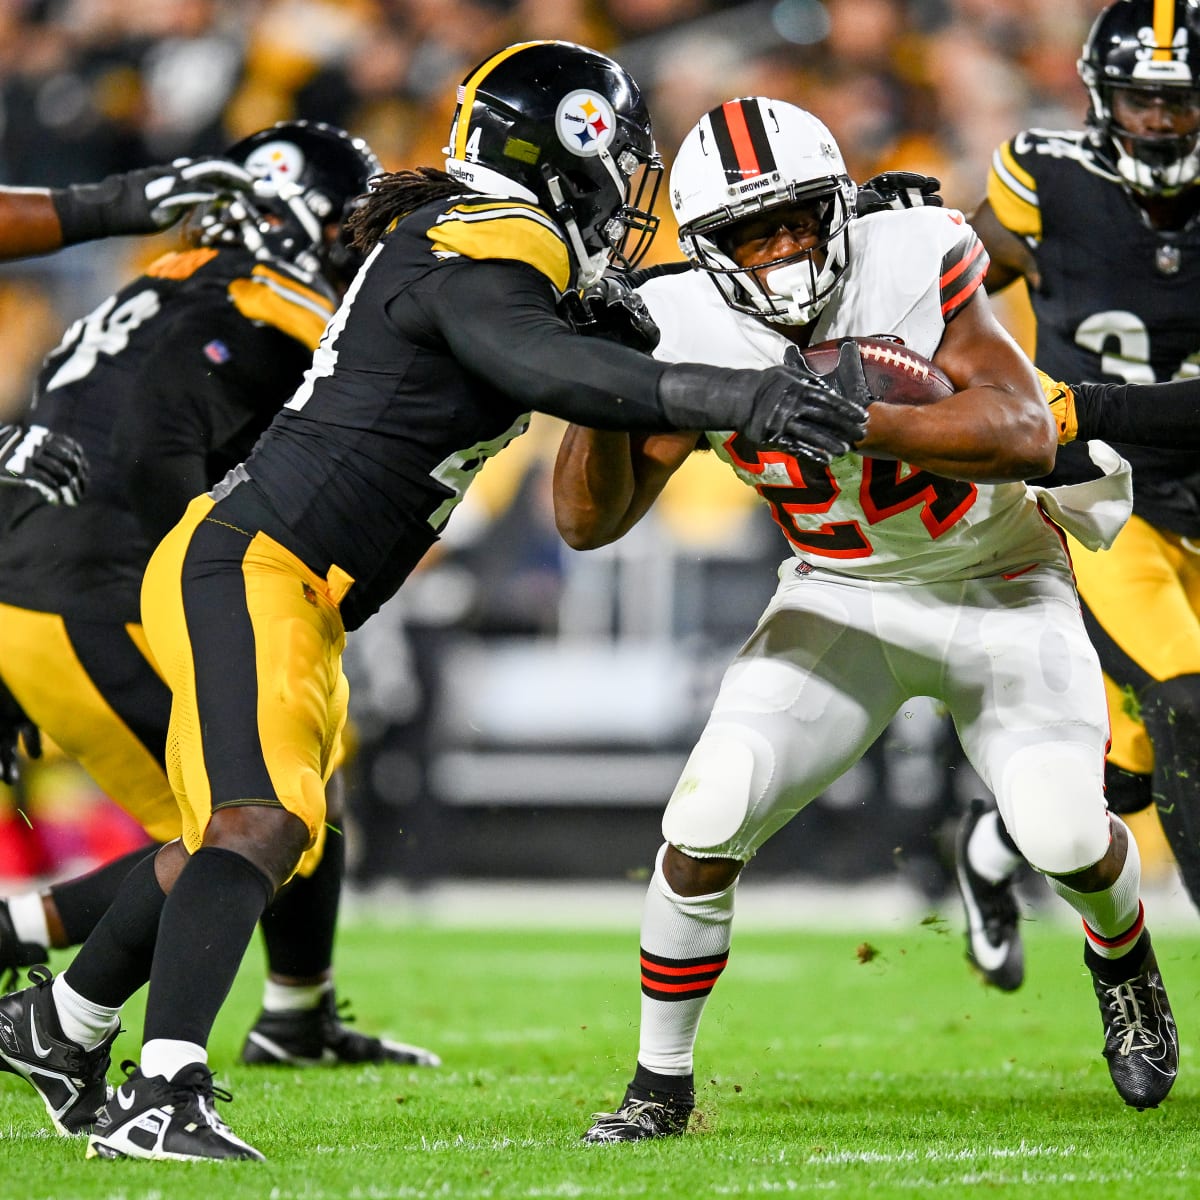 Browns star running back Nick Chubb expected to miss season after